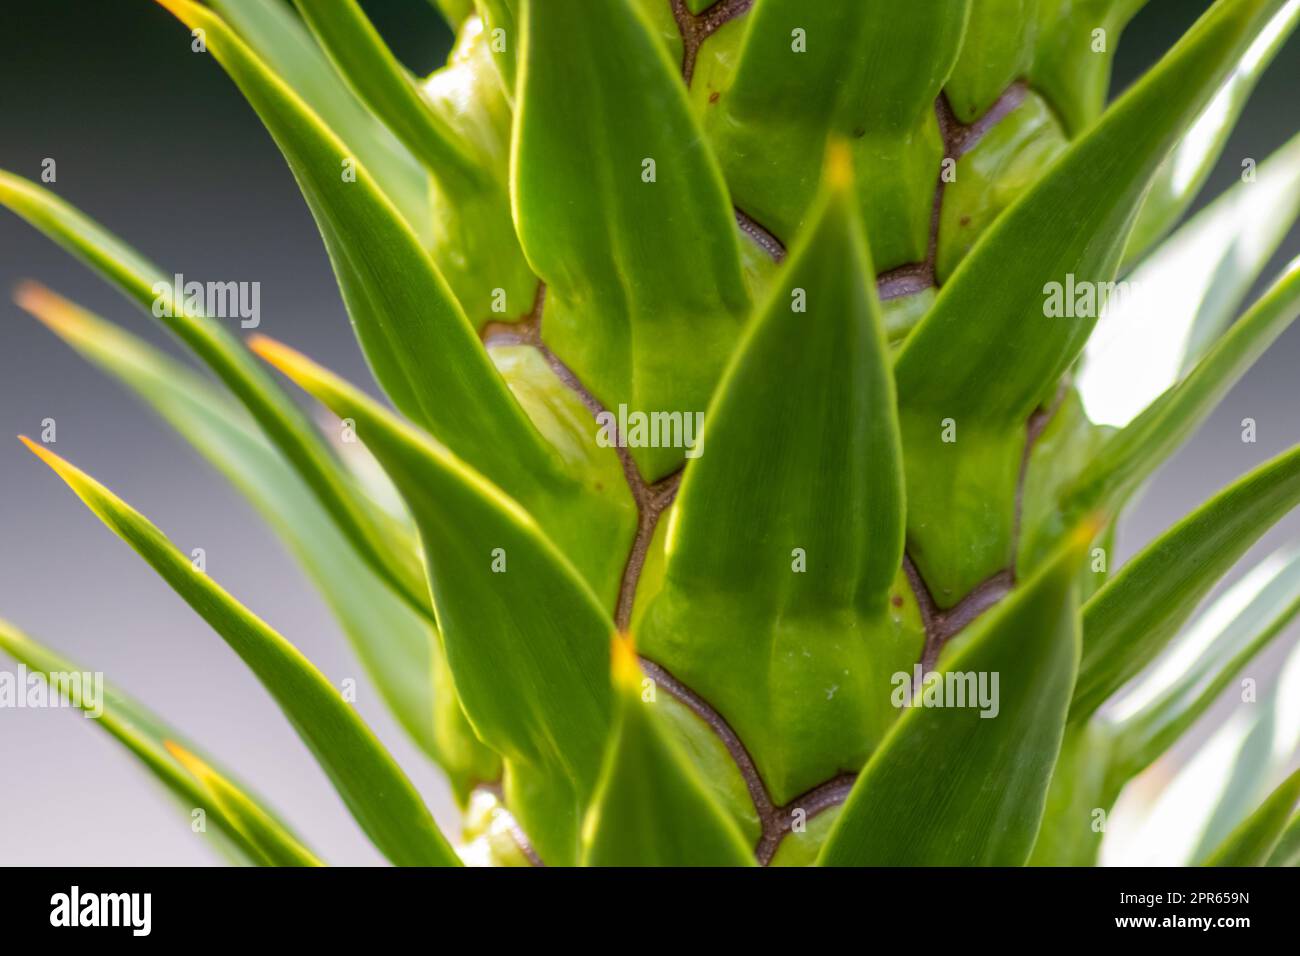 Green thorny leaves of araucaria araucana or monkey tail tree with sharp needle-like leaves and spikes of exotic plant in the wilderness of patagonia shows symmetric shape details of the green leaves Stock Photo